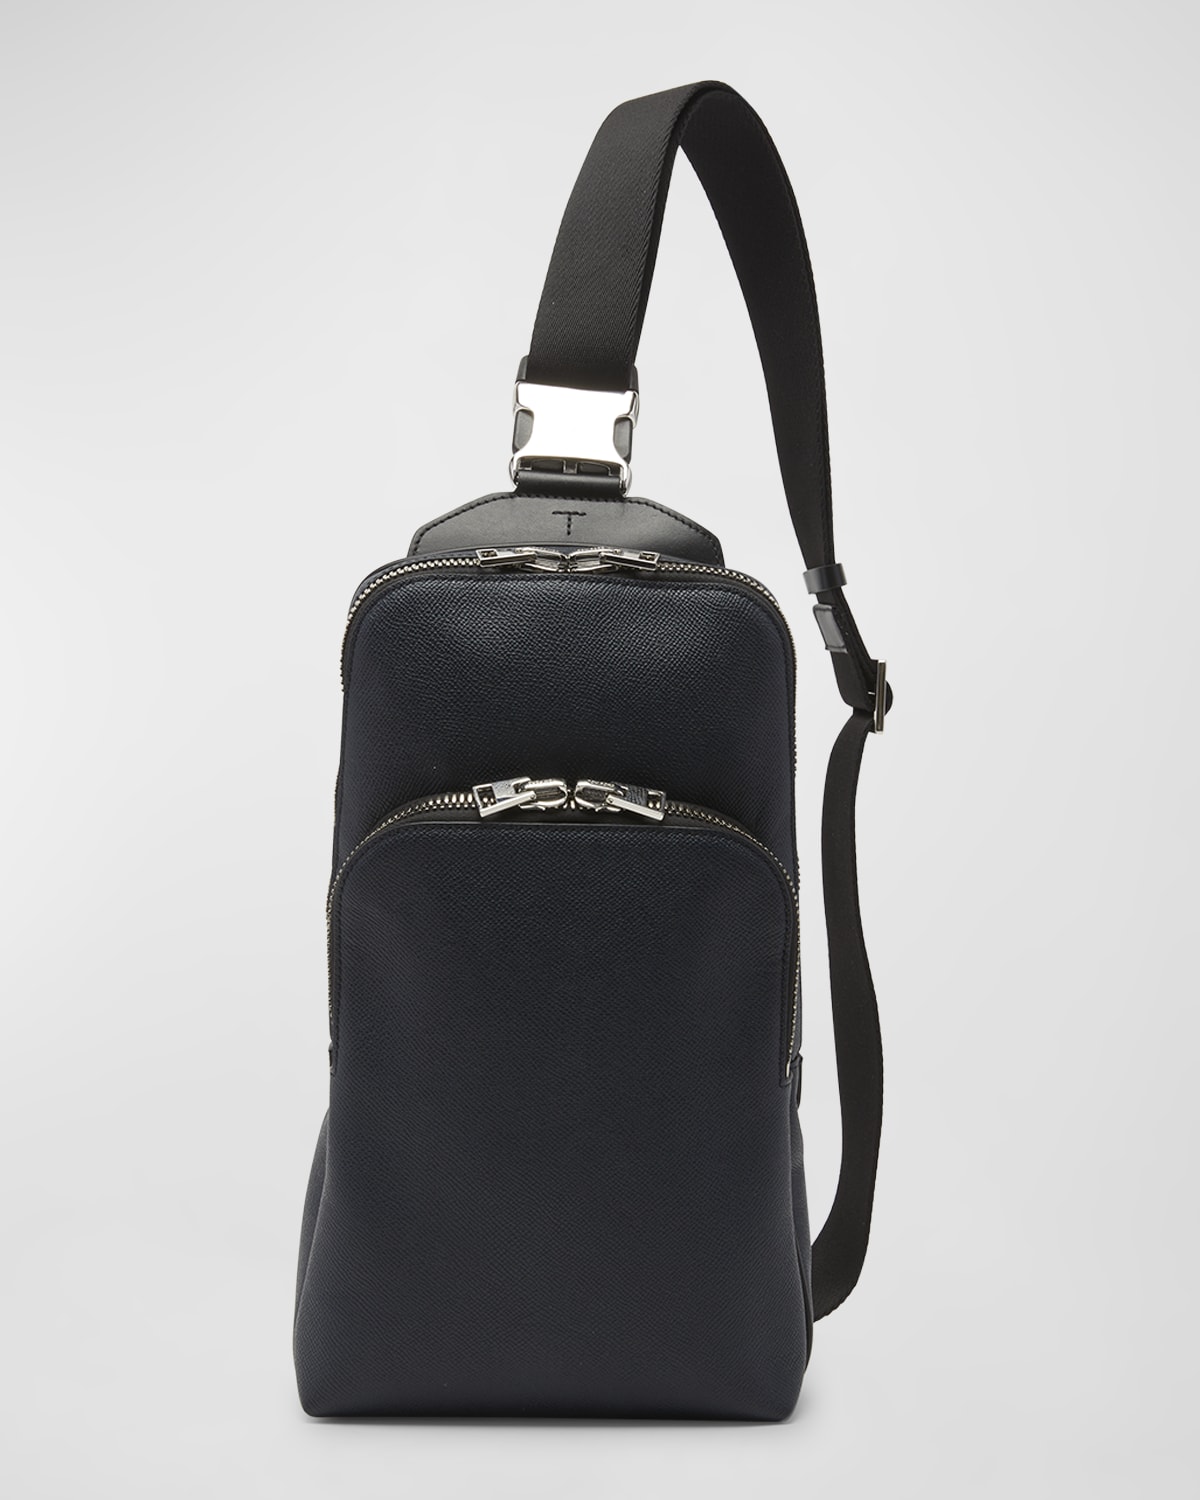 Tom Ford Men's Buckley Leather Sling Backpack In Midnight Blue/black